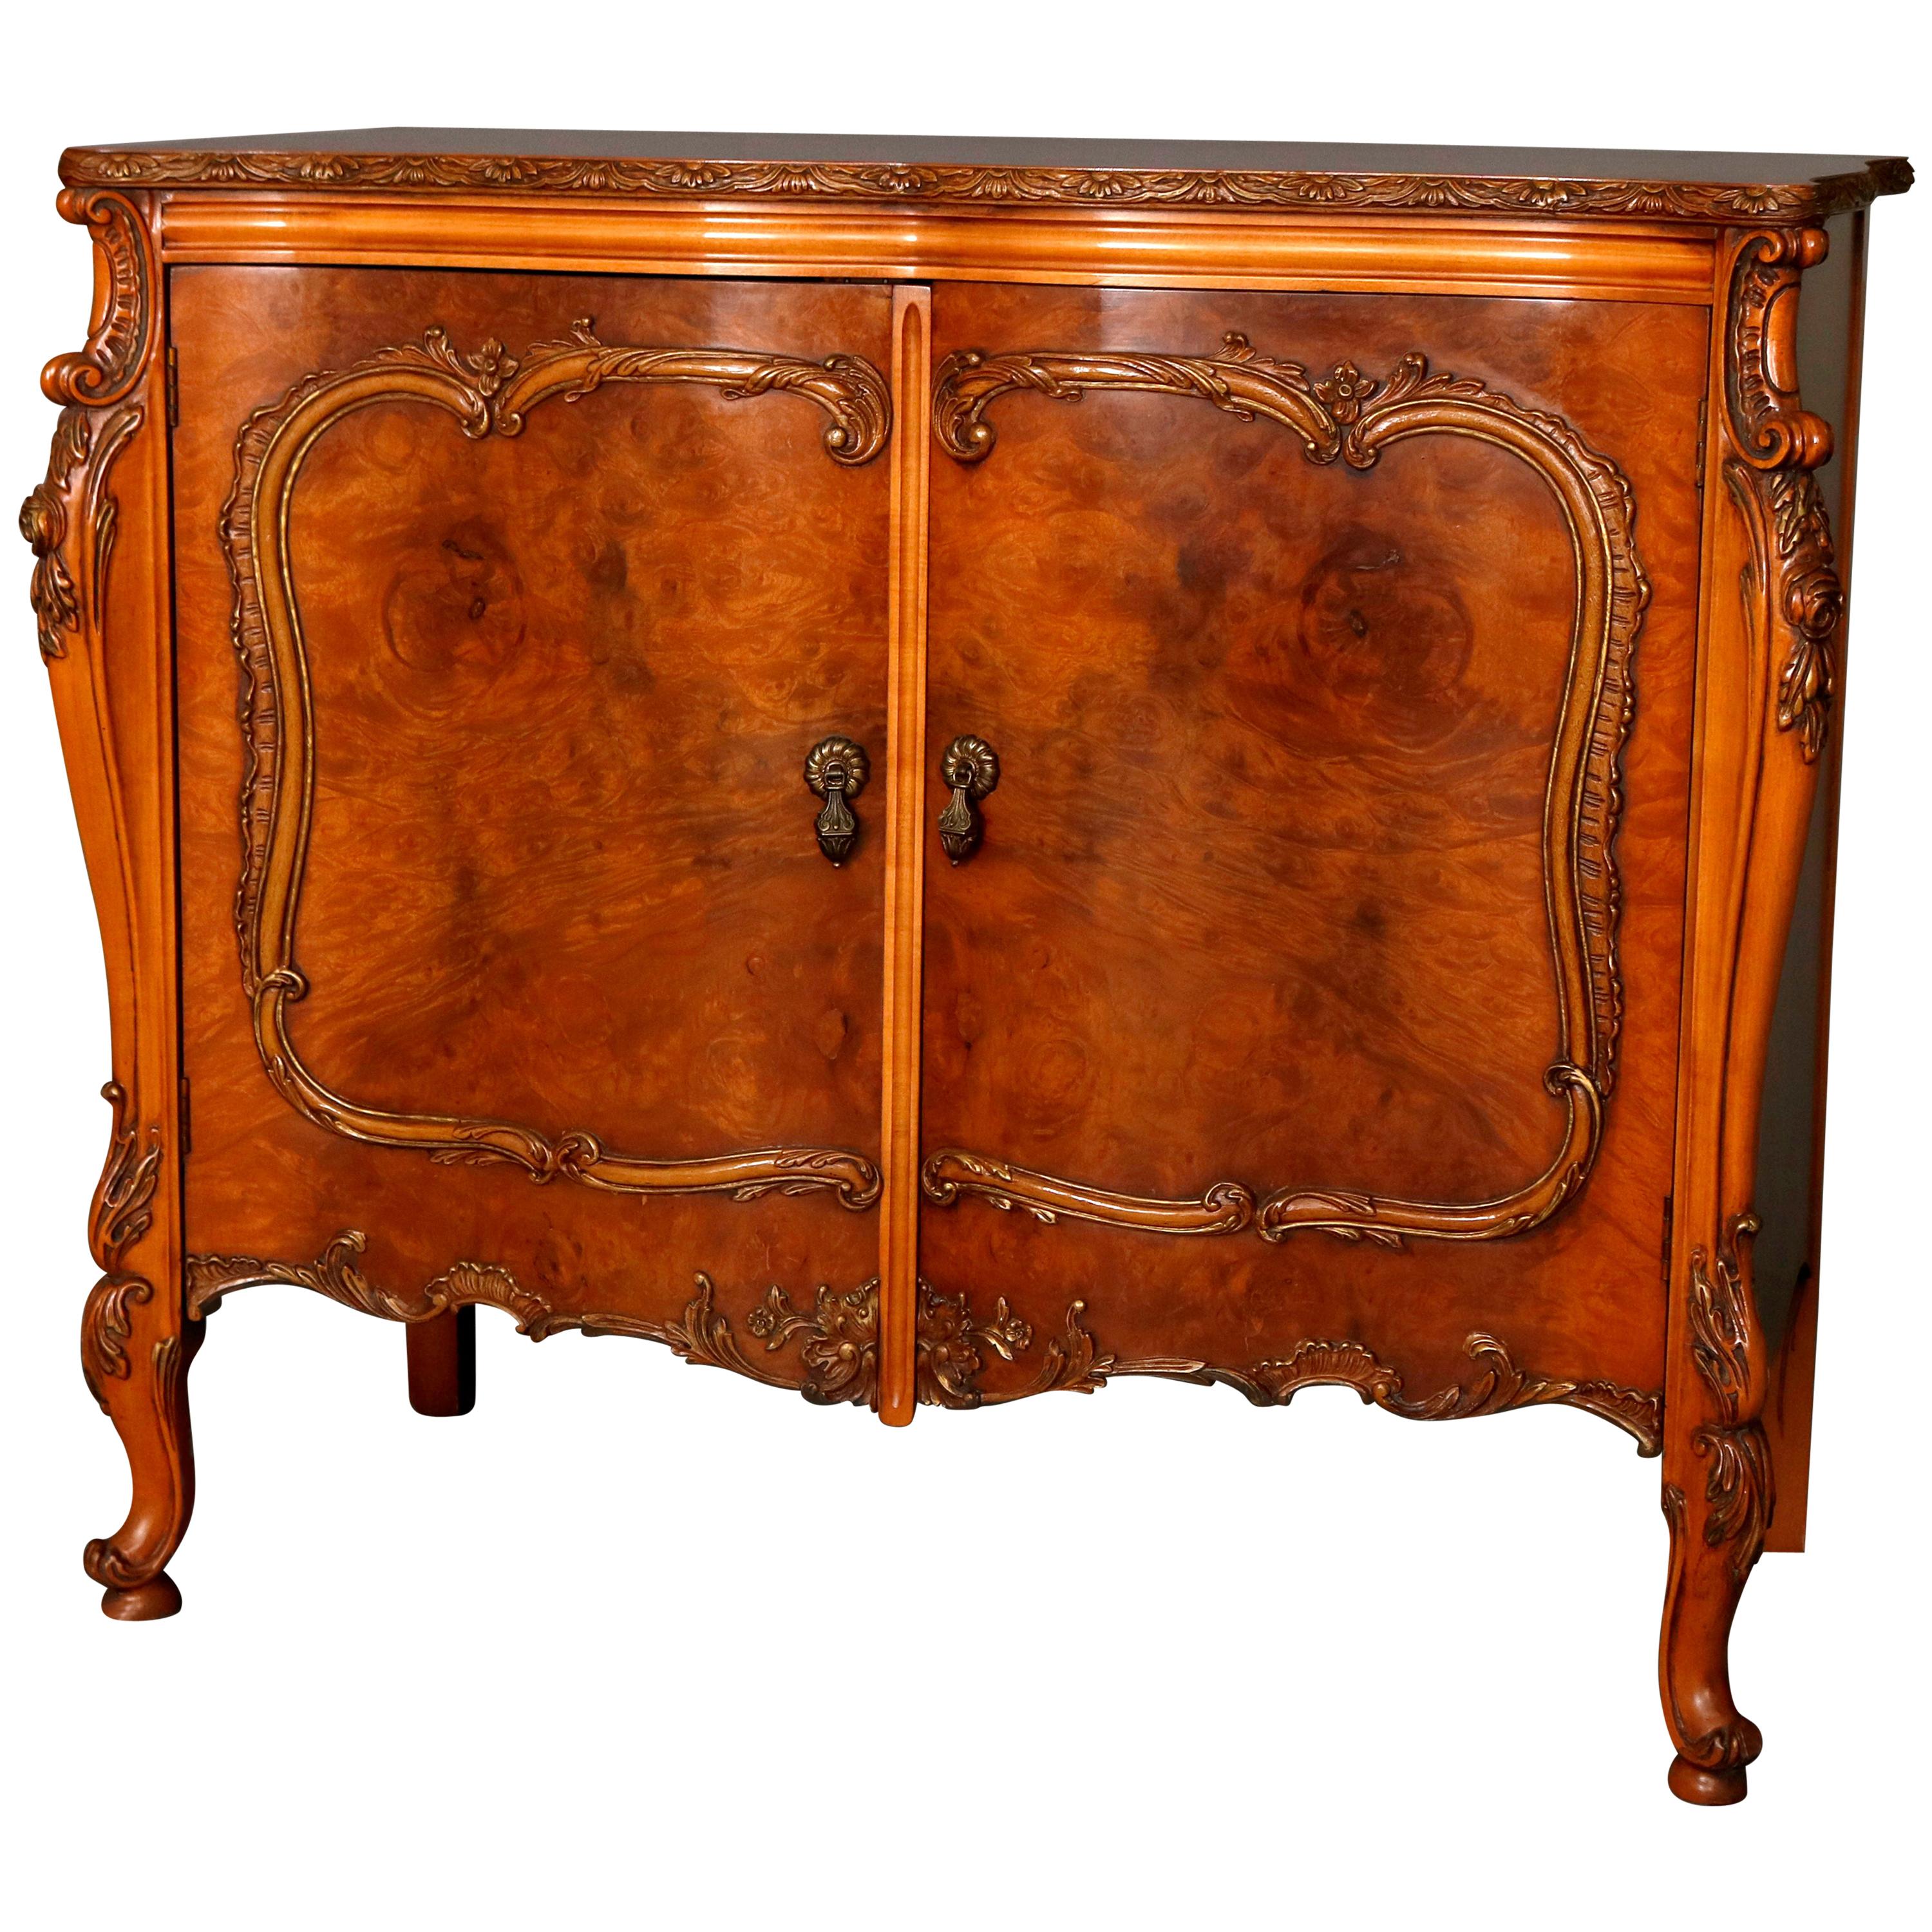 Antique French Louis XV Style Maple and Burl Credenza by American Furniture